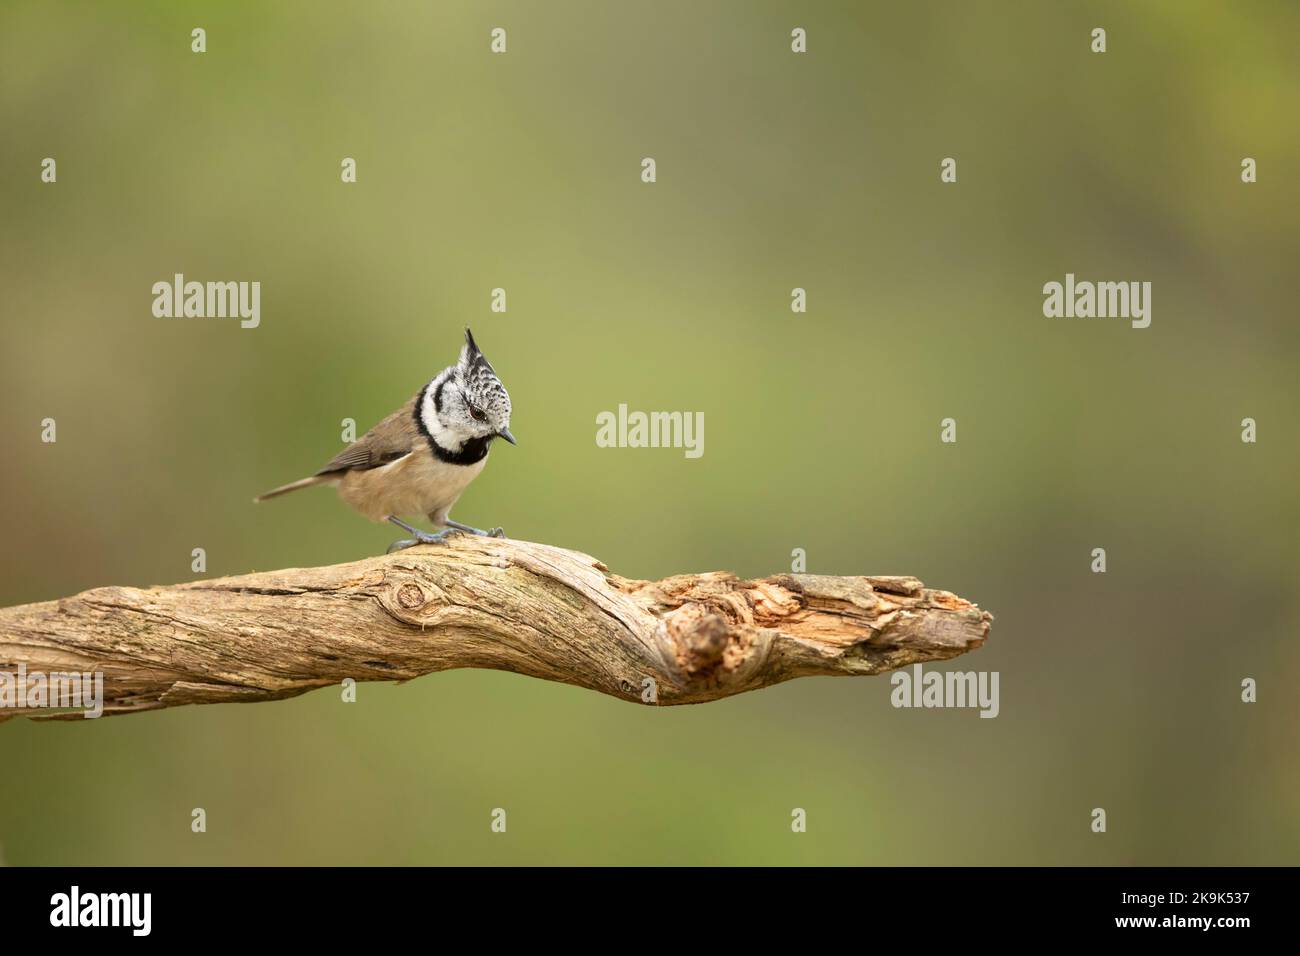 Passerine bird Crested Tit sitting in forest with green background. Europe, Finland Stock Photo